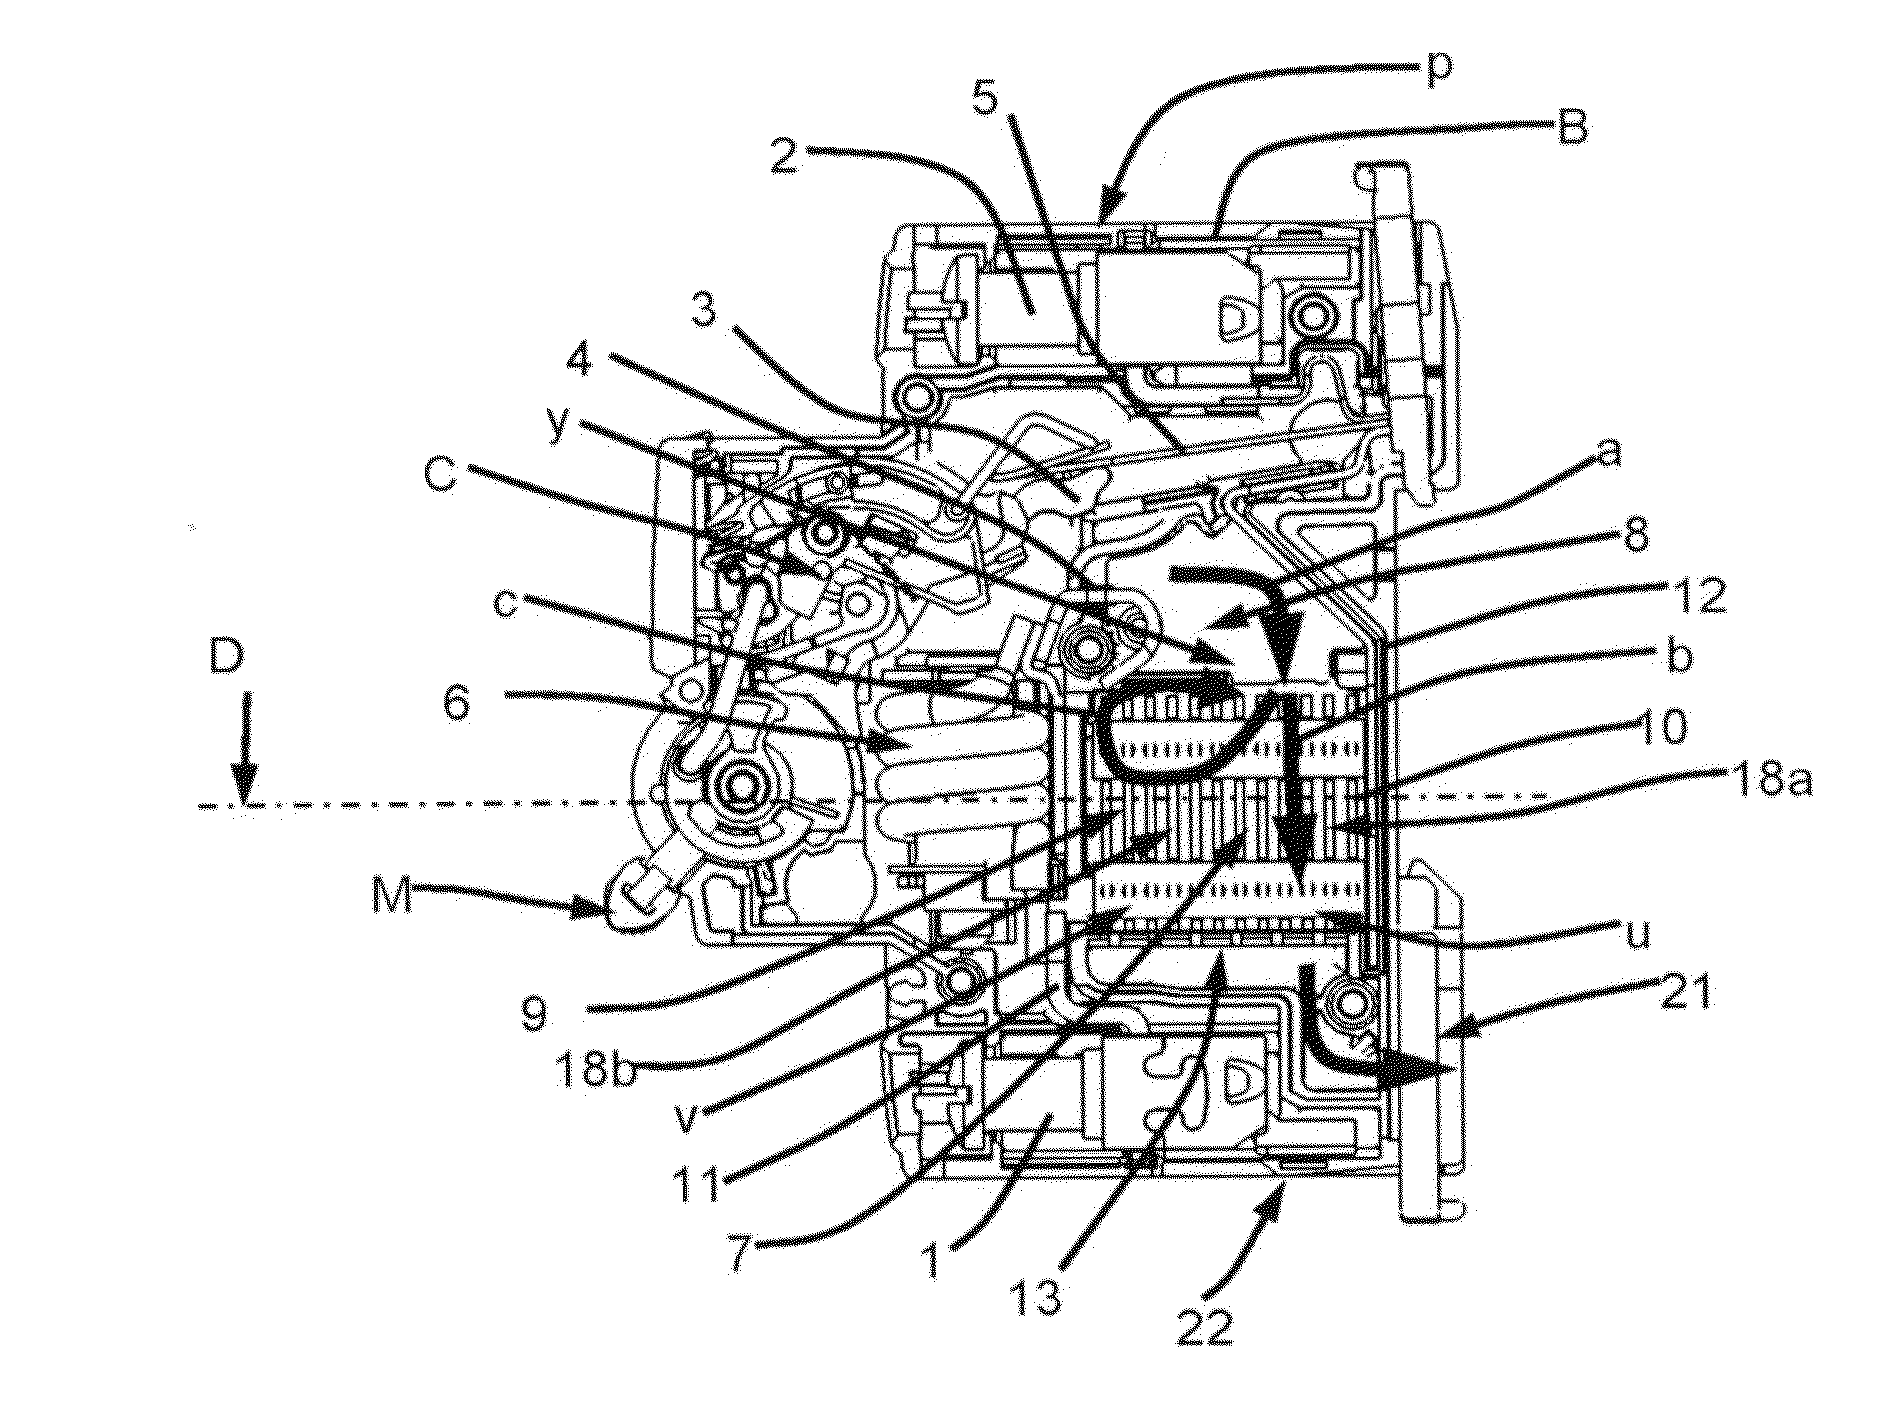 Arc extinguishing chamber for an electric protection apparatus and electric protection apparatus comprising same